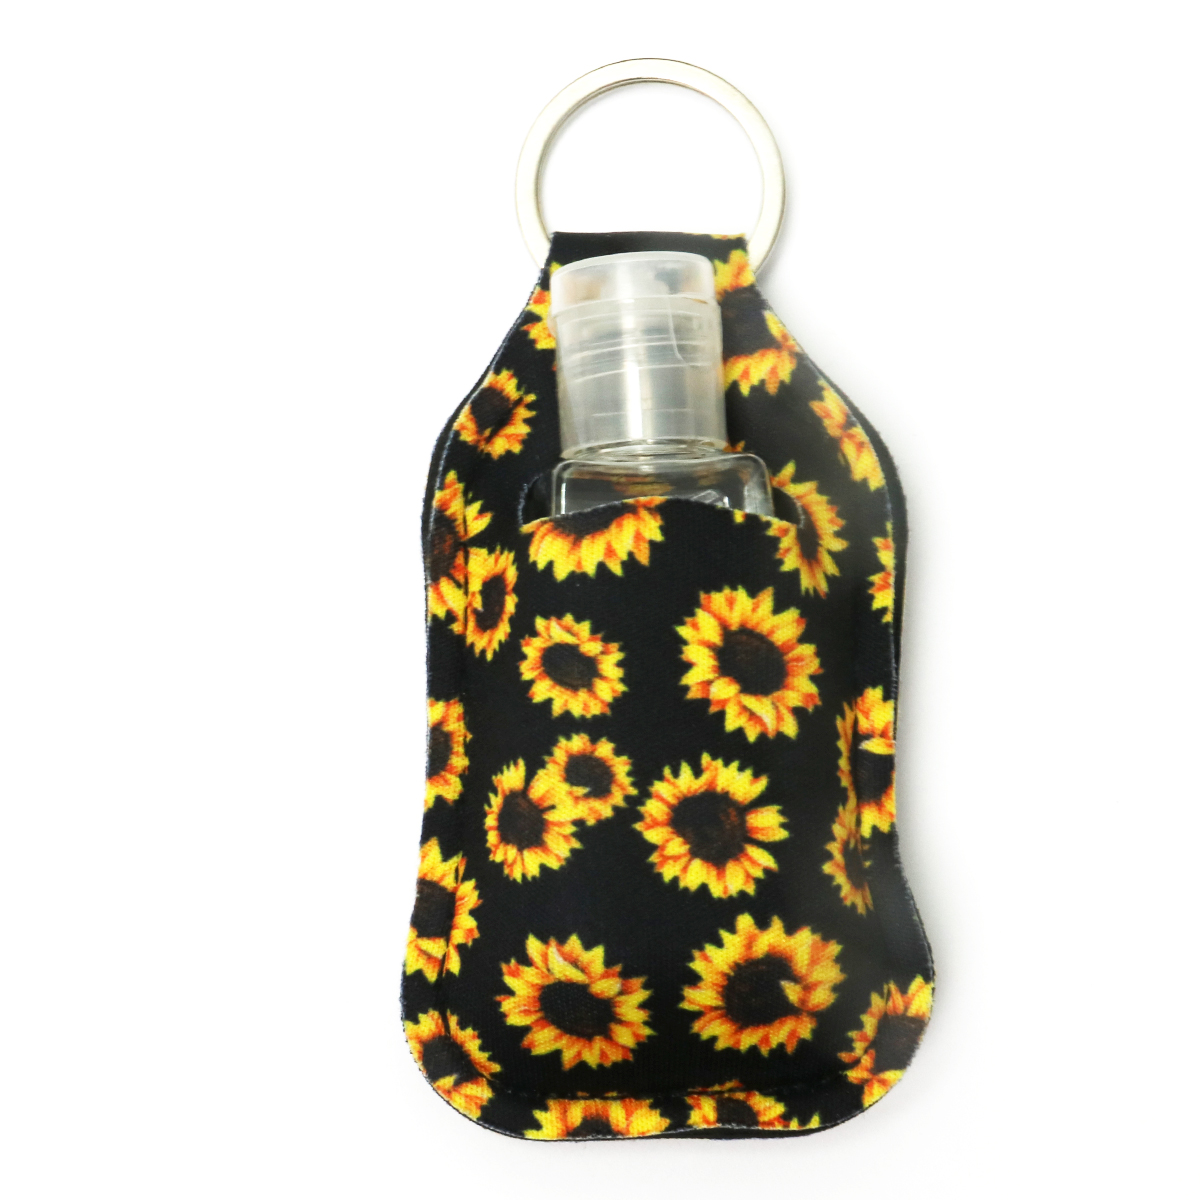 Liquid soap bottle for keychains